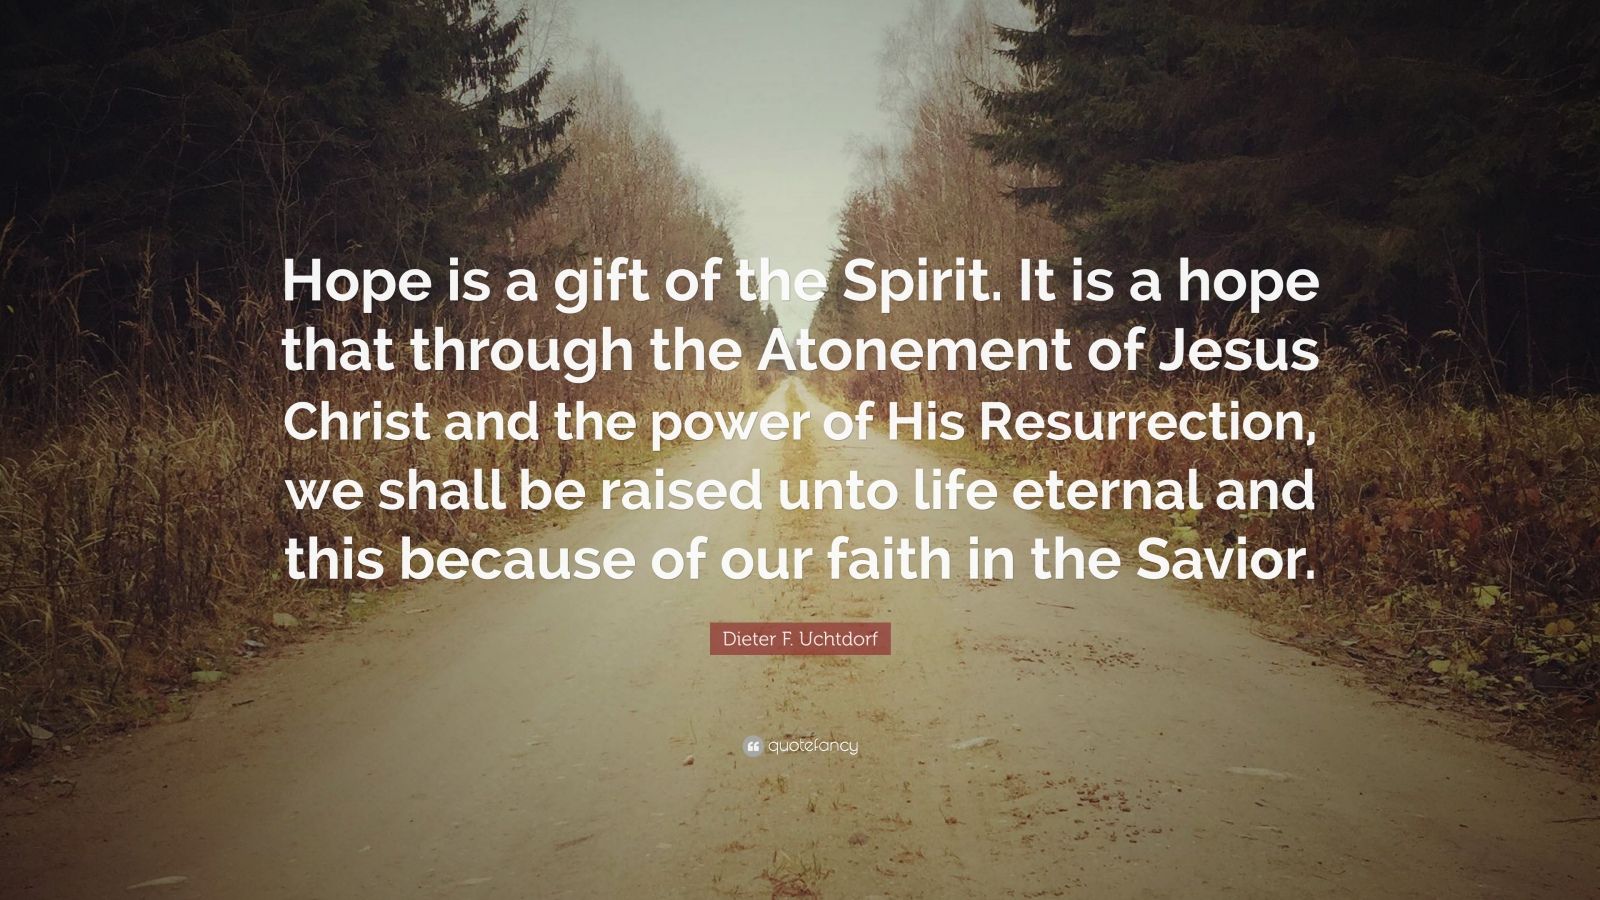 Dieter F. Uchtdorf Quote: “Hope is a gift of the Spirit. It is a hope